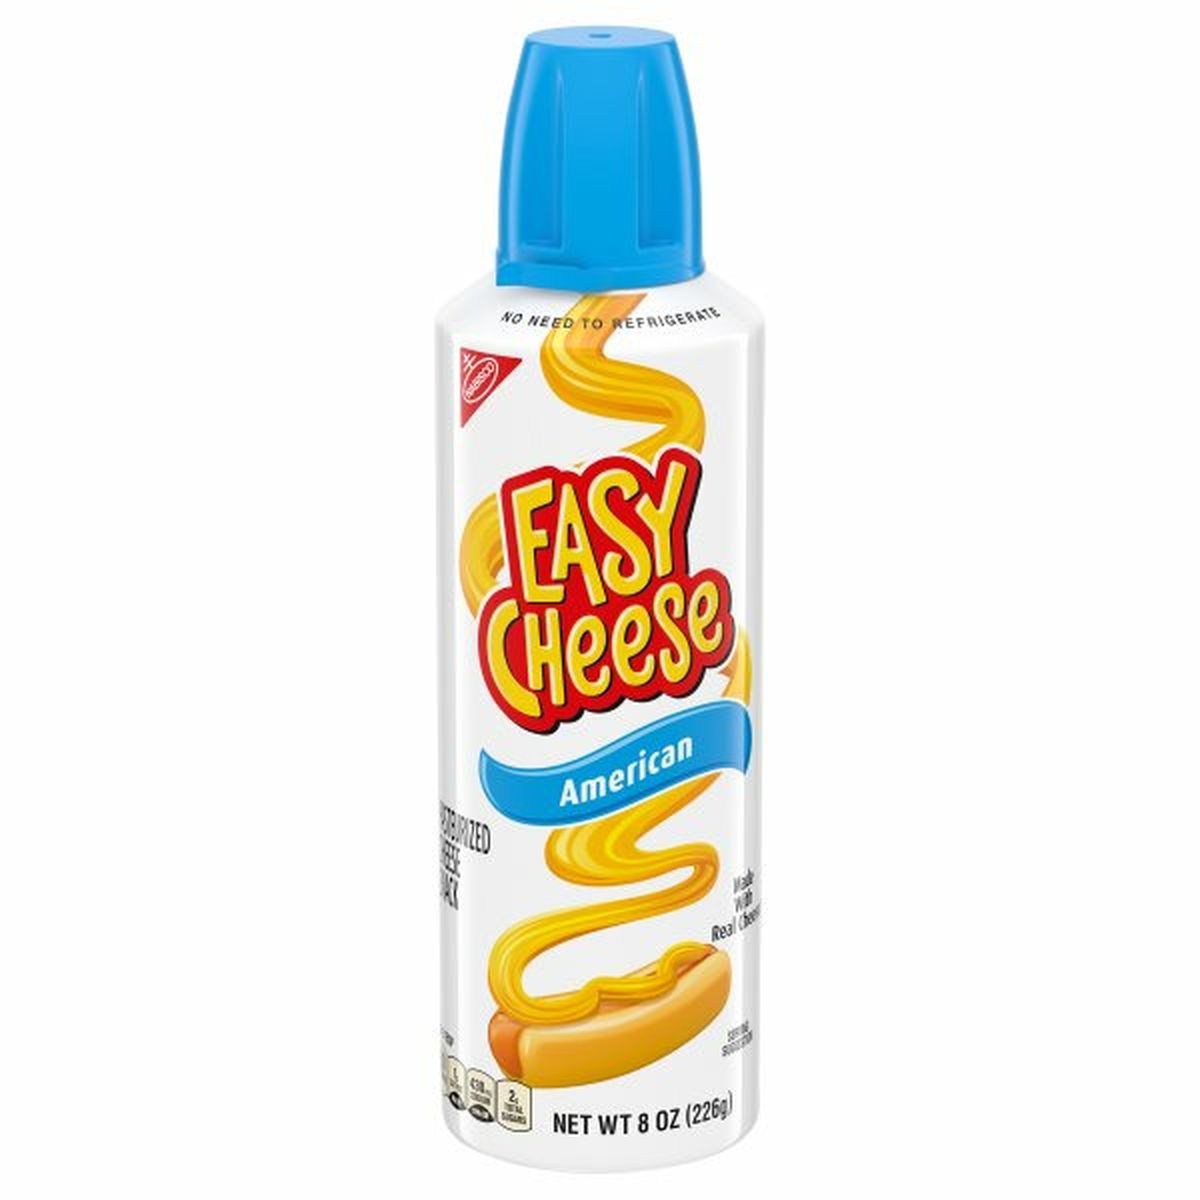 Calories in Easy Cheese Cheese Snack, Pasteurized, American